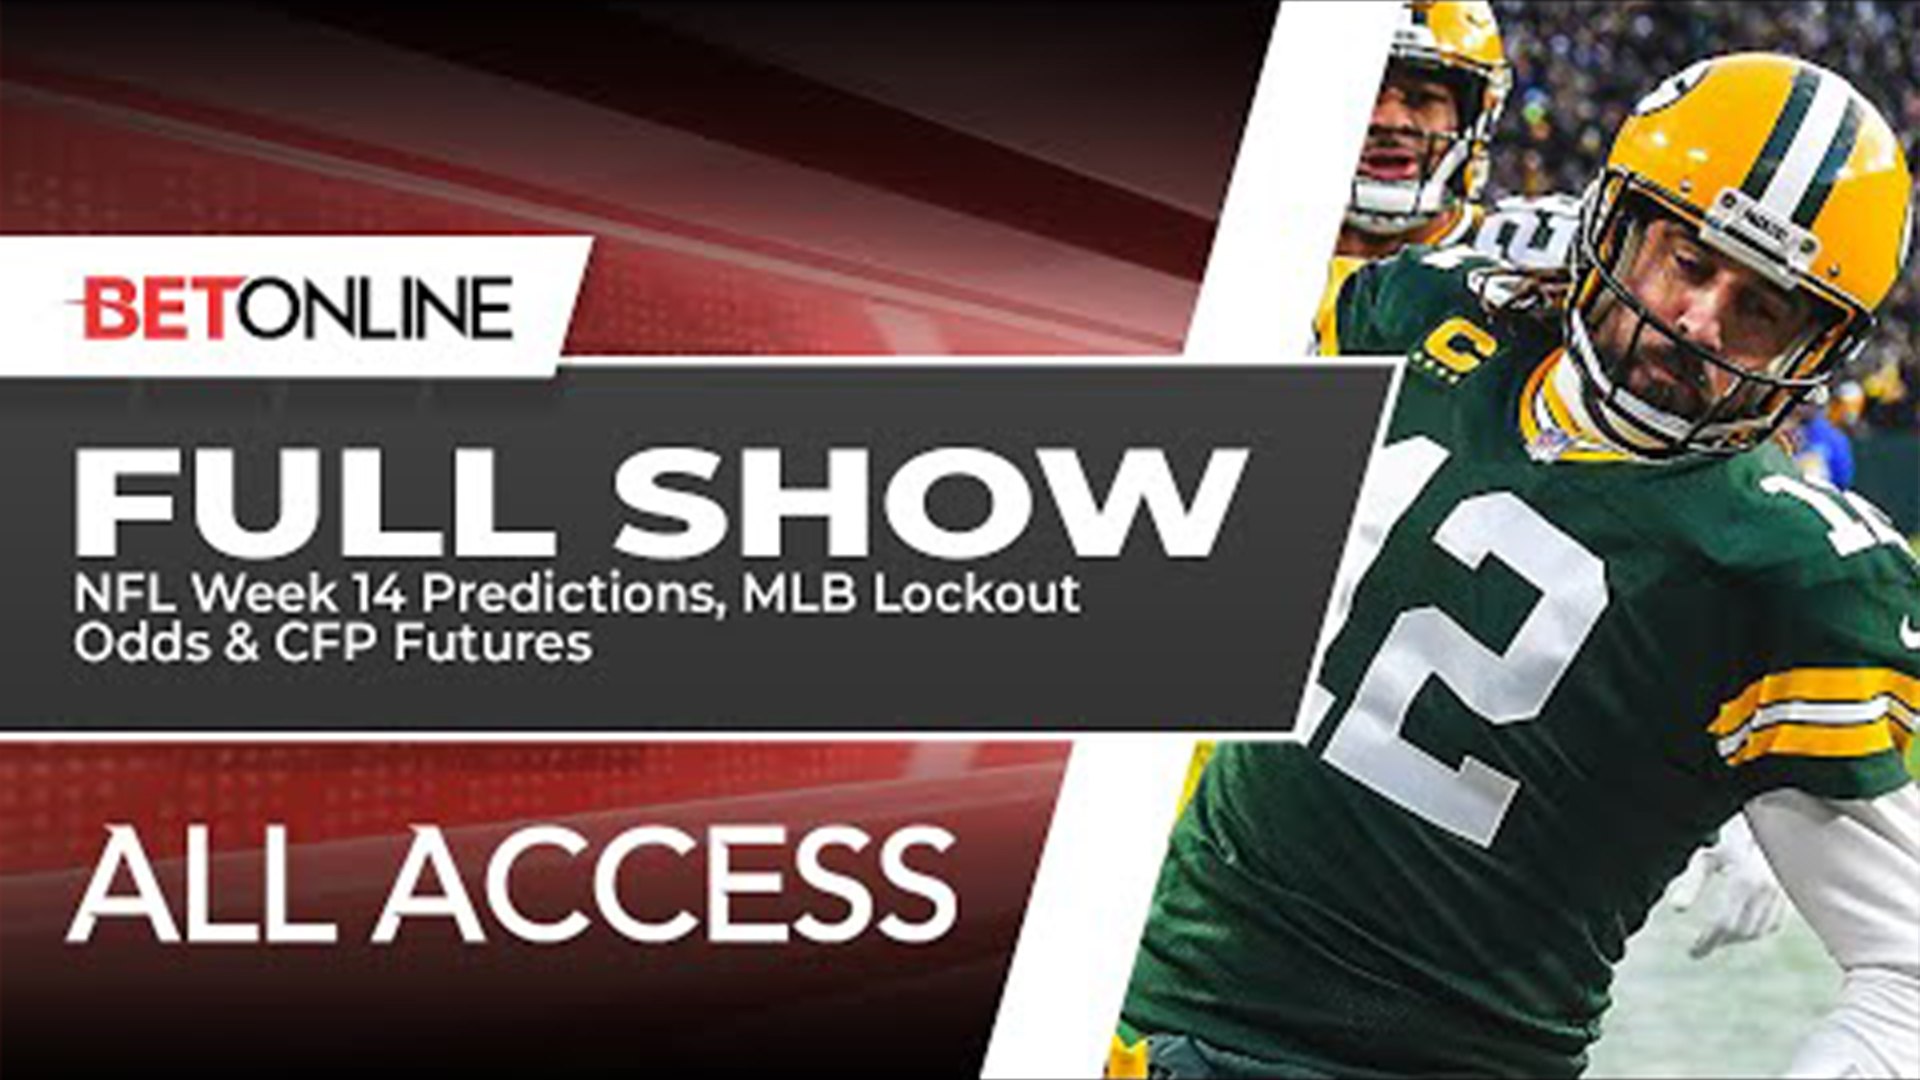 NFL Picks for Week 14, MLB Lockout Odds and CFP Odds BetOnline All Access Full Show